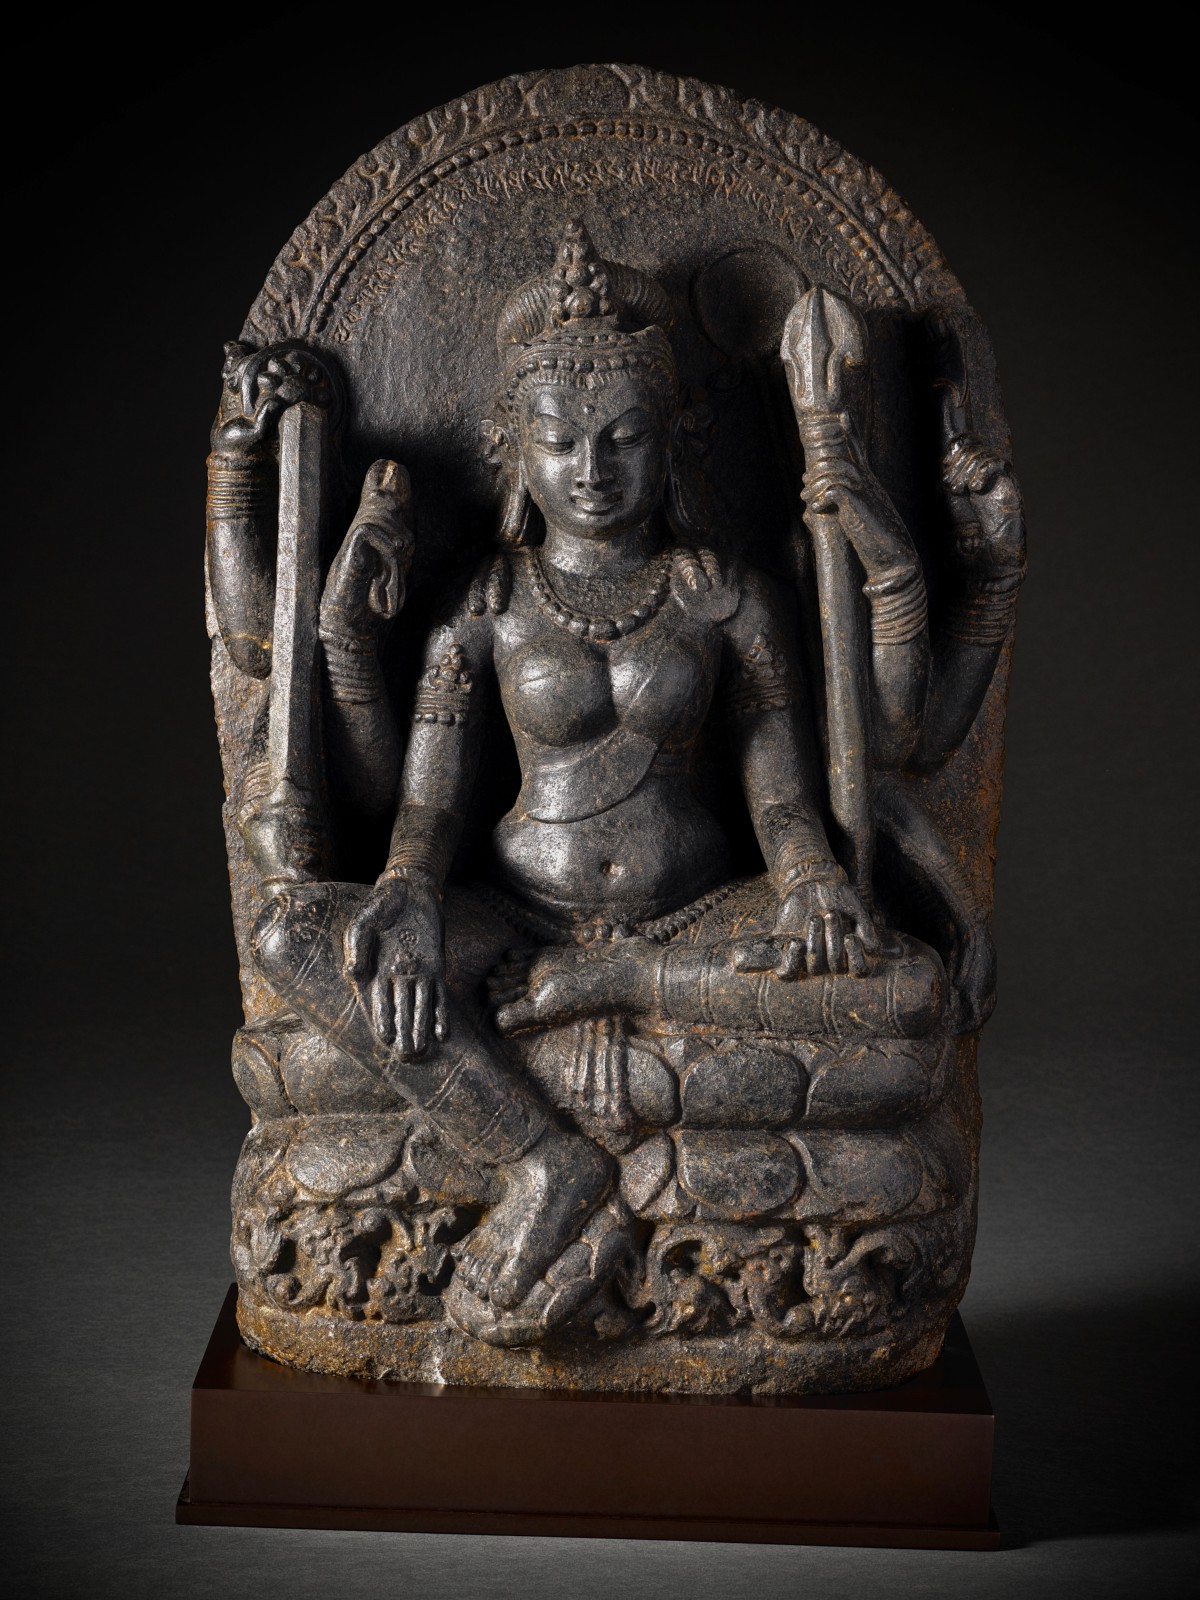 Same photo of This remarkable sculpture portrays Mahapratisara, the principal Raksha goddess, with her distinctive eight arms adorned with various symbolic attributes.